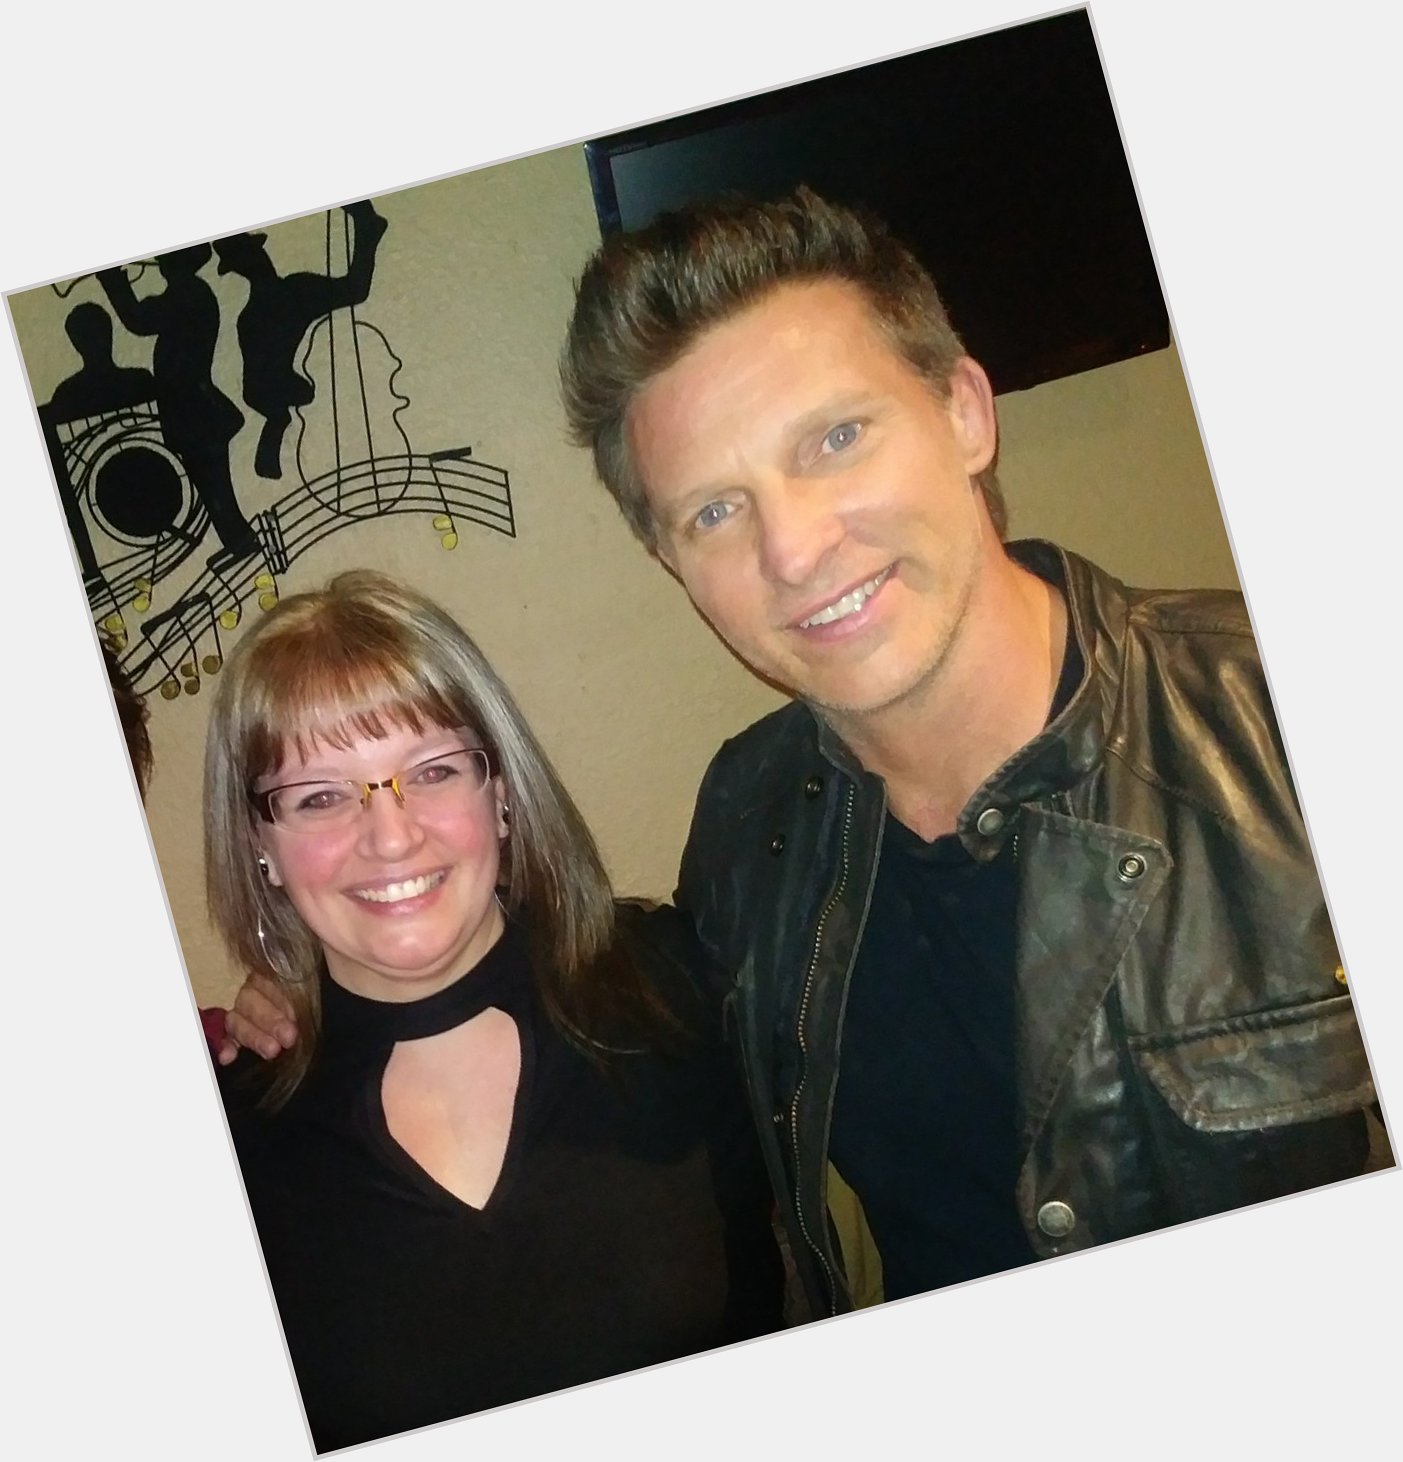 Happy Birthday Steve Burton! Hope you had a blessed day. 